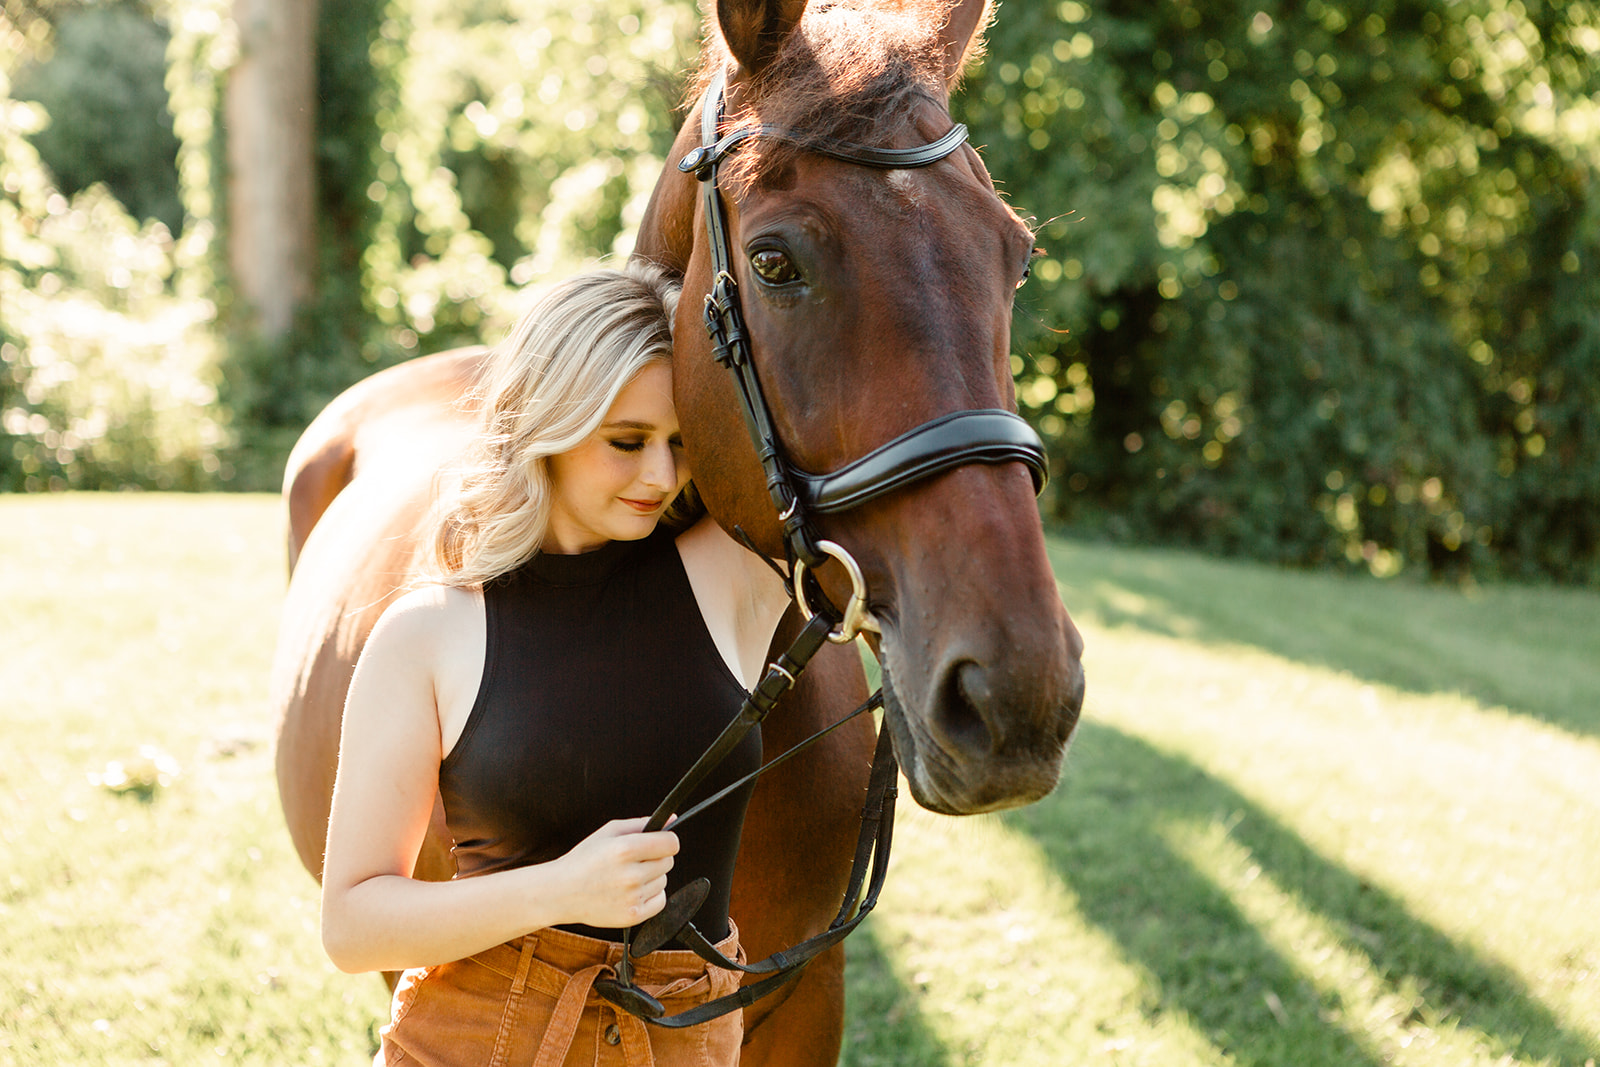 Paige with her horse, at her senior portrait session.